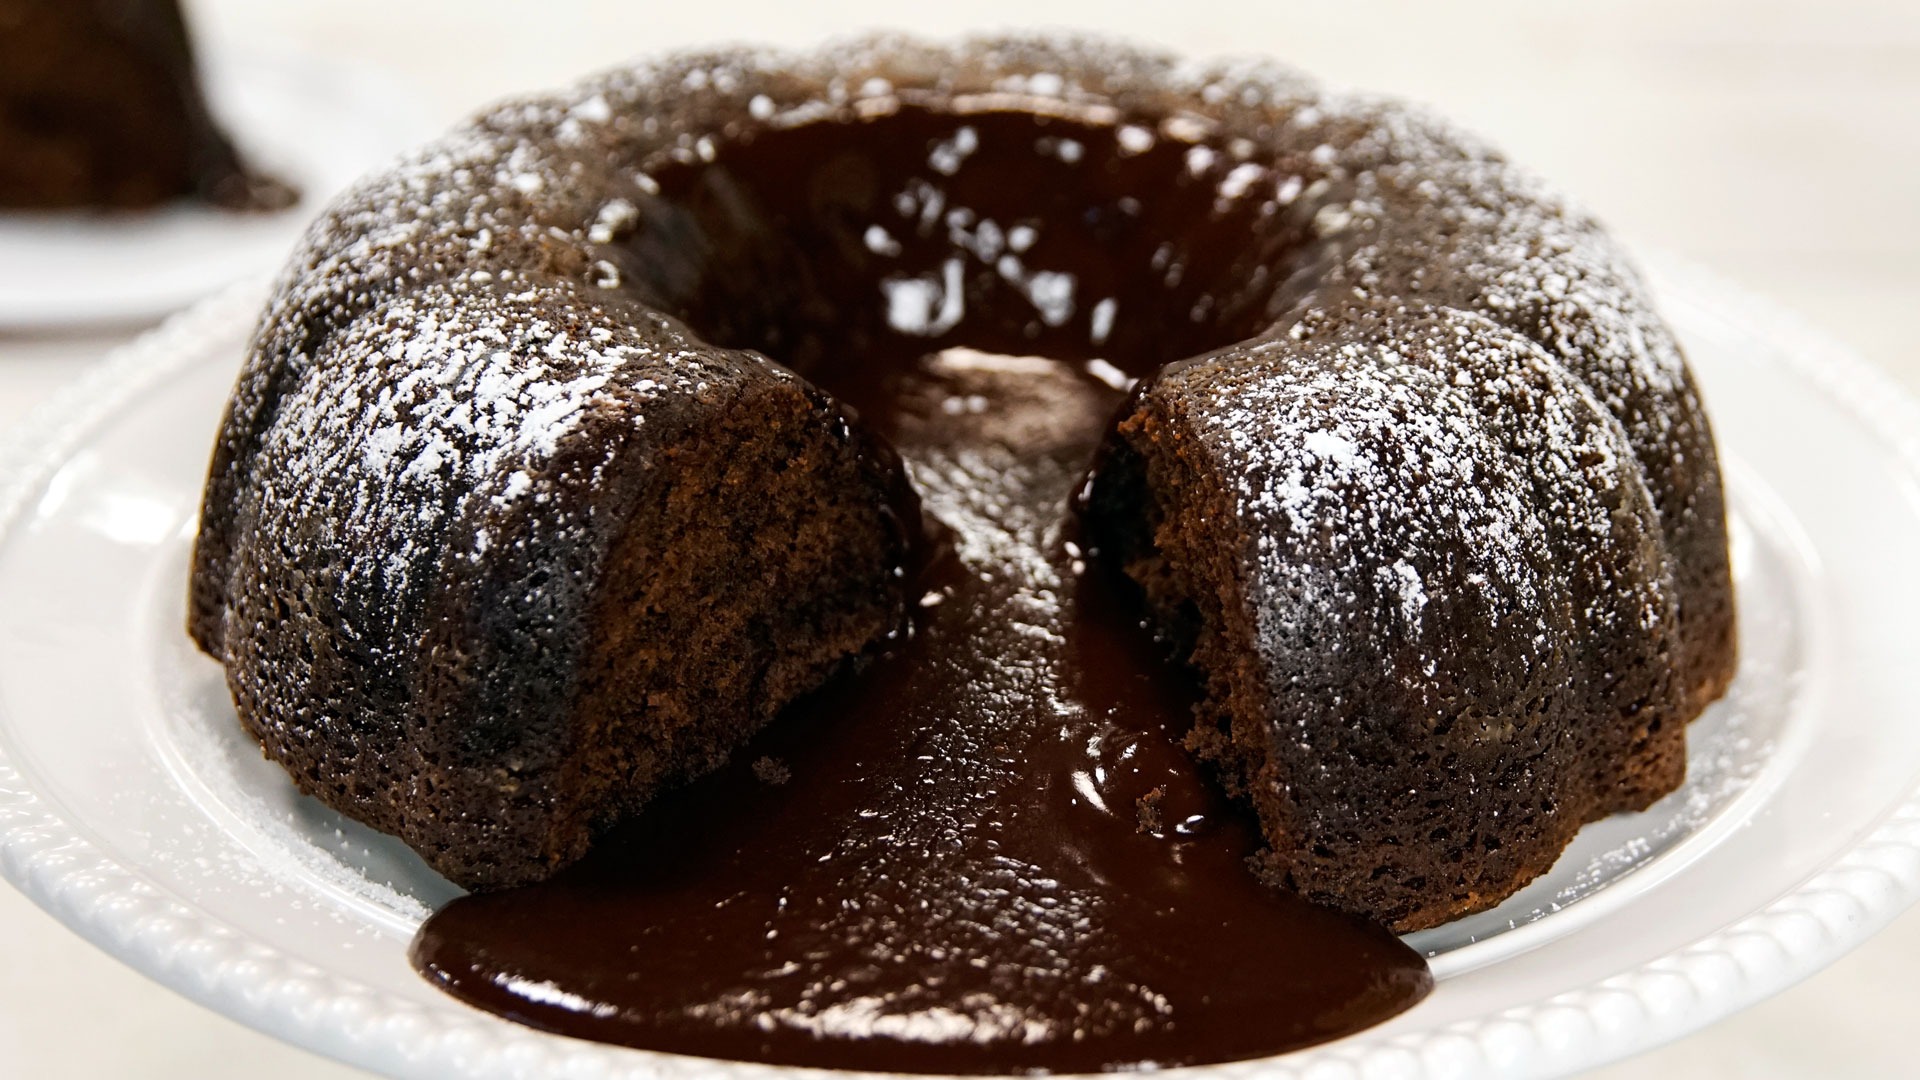 Chocolate steamed pudding with chocolate sauce recipe - BBC Food